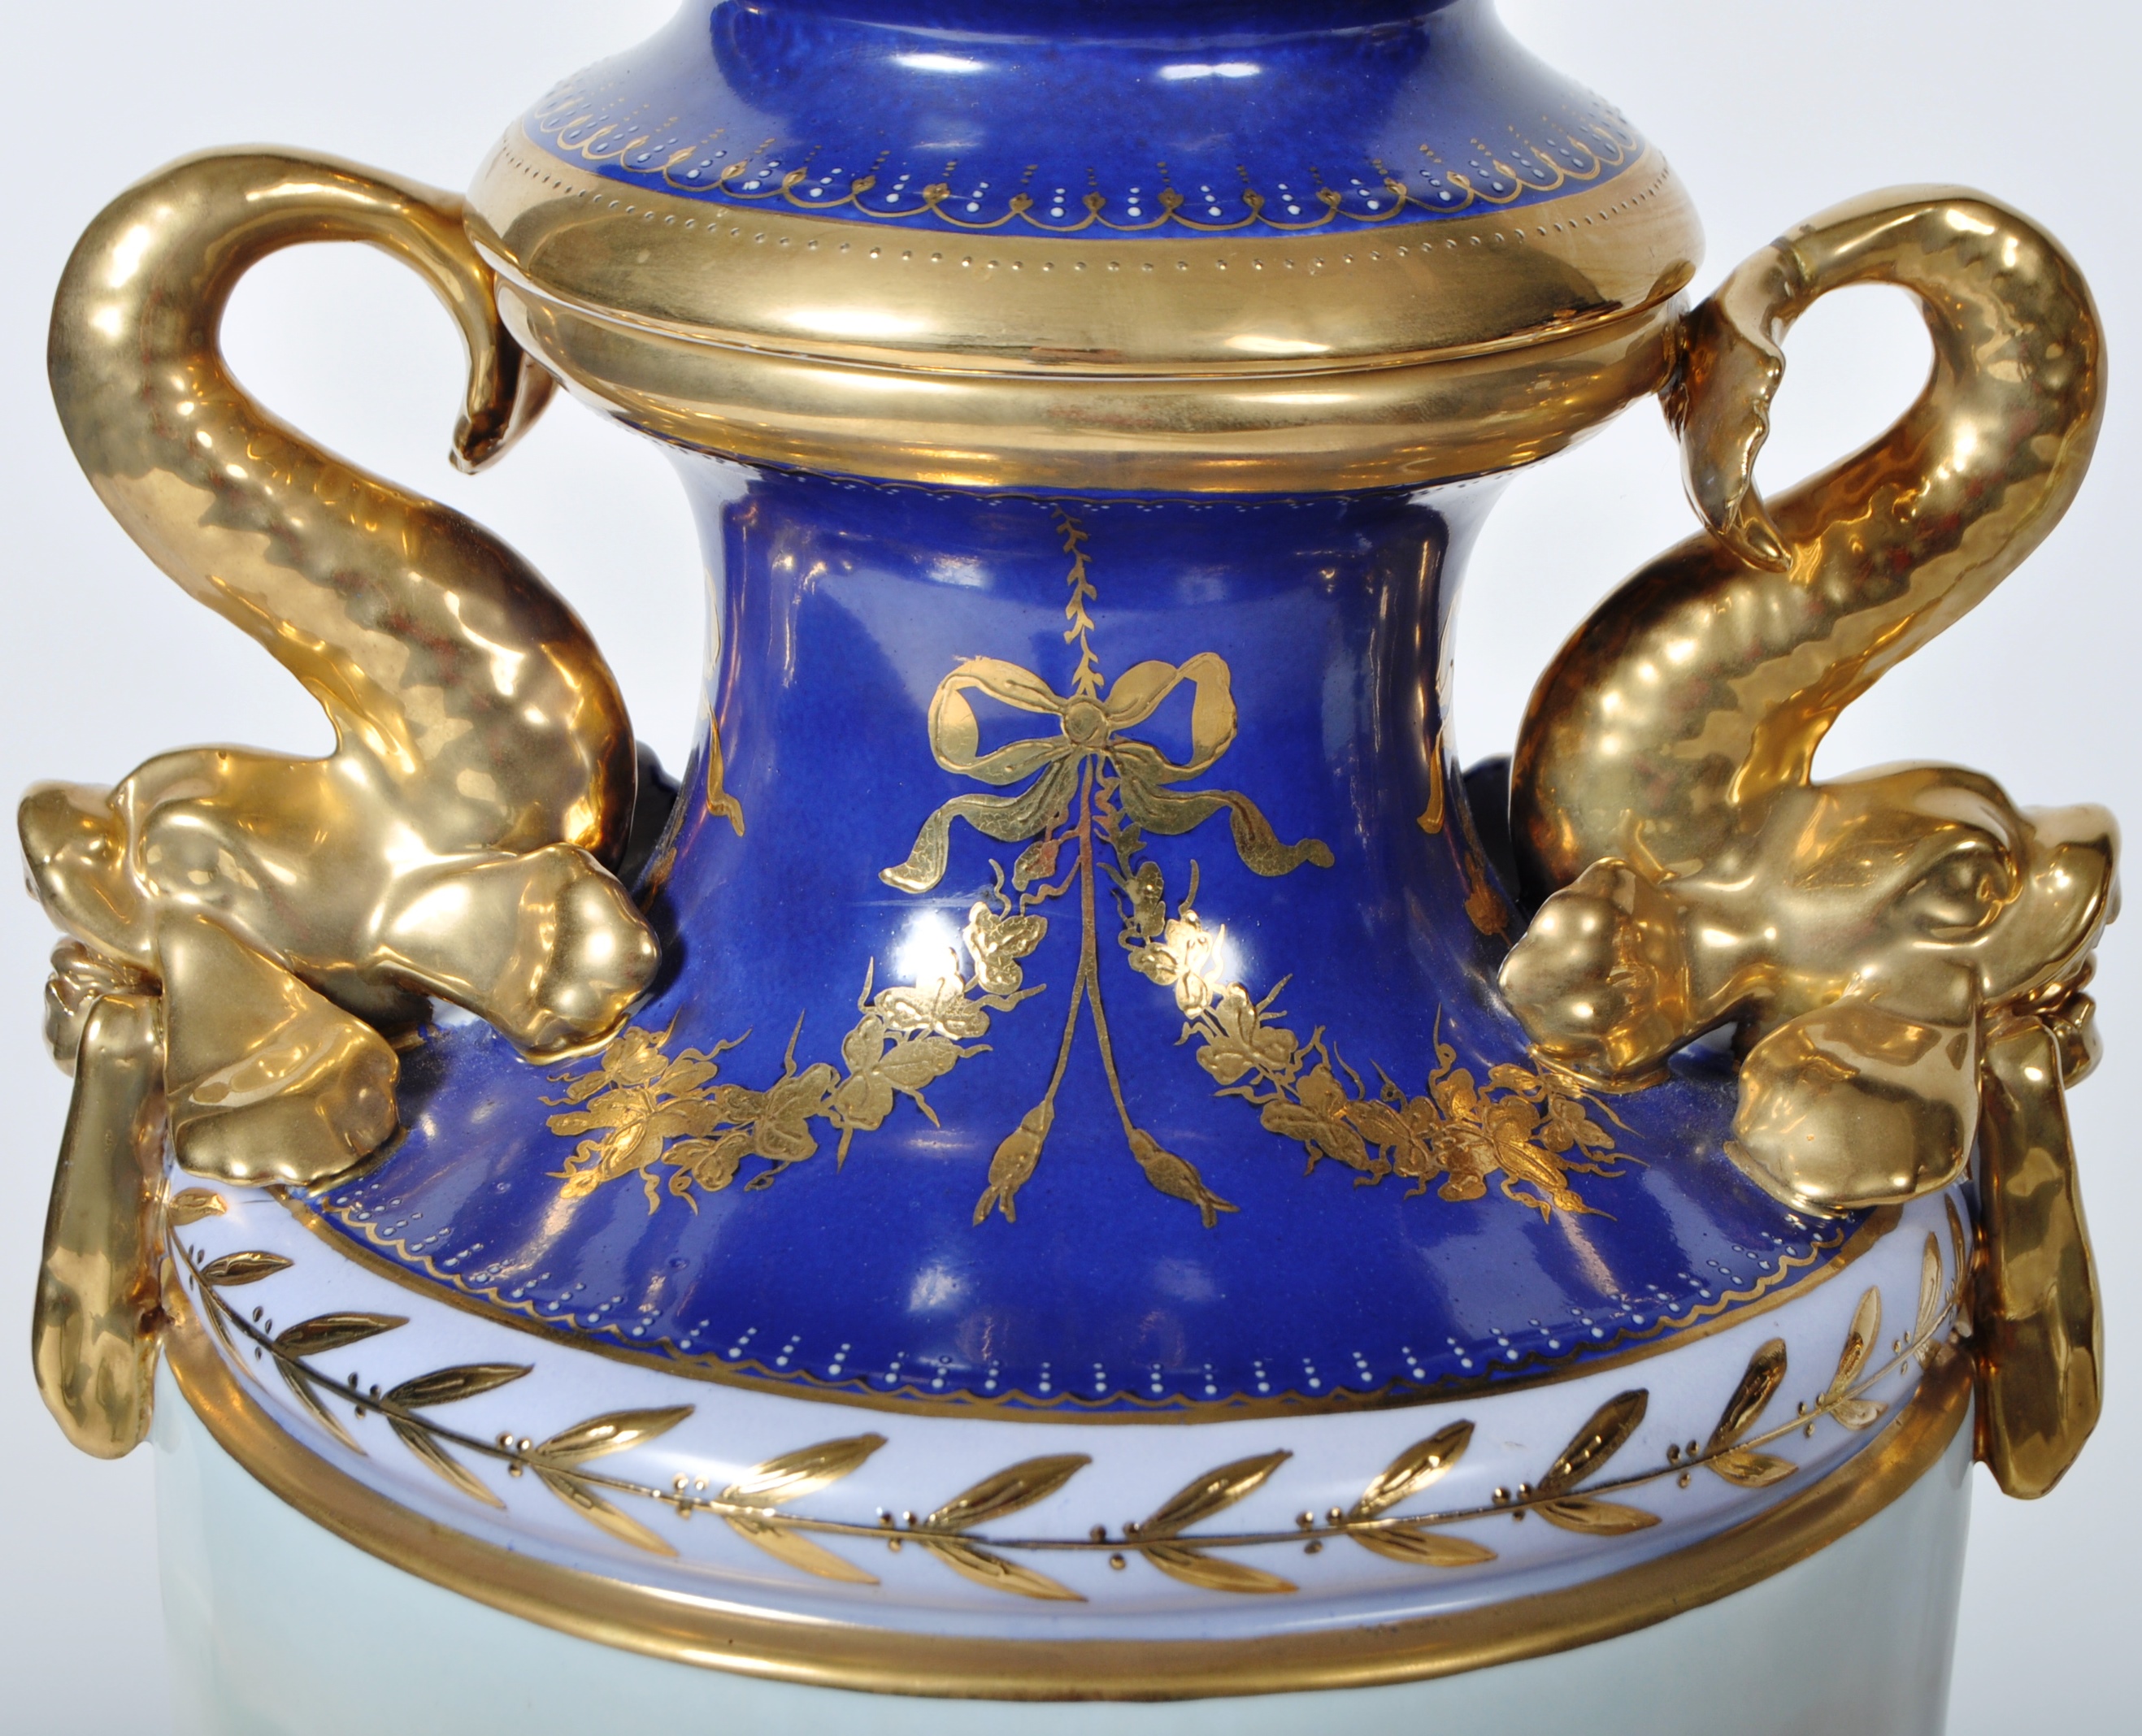 A PAIR OF FRENCH EMPIRE STYLE BALUSTER FORM VASES - Image 6 of 11